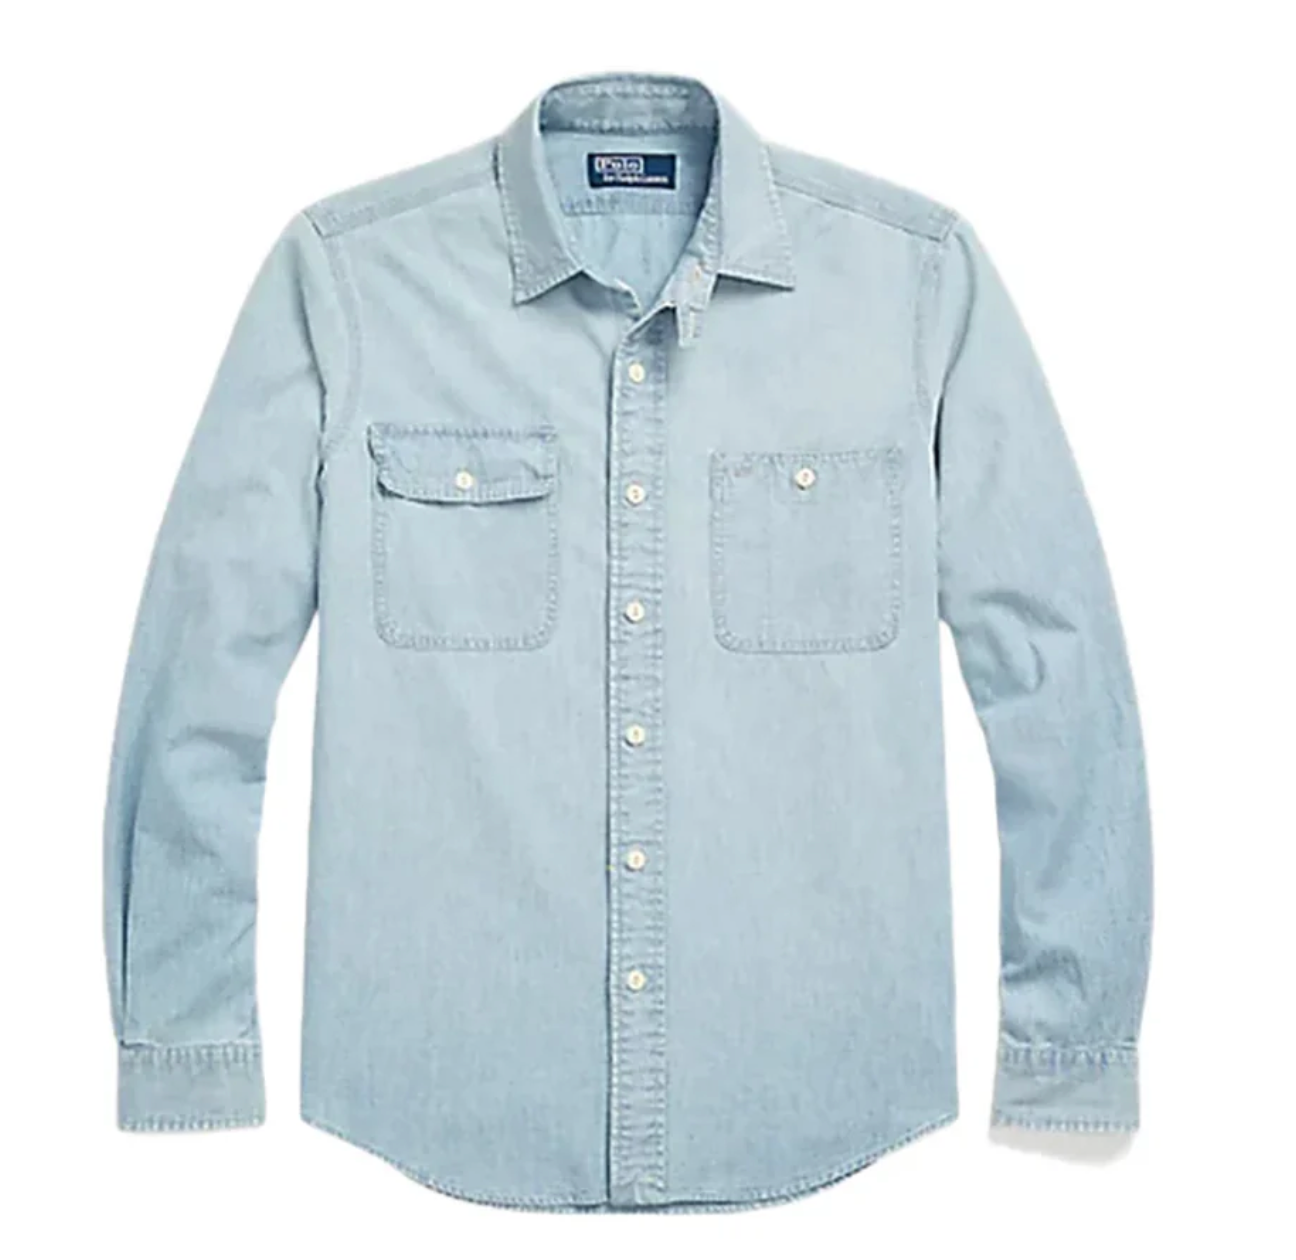 LONG-SLEEVE ELEVATED CHAMBRAY DUNGAREE WORKSHIRT